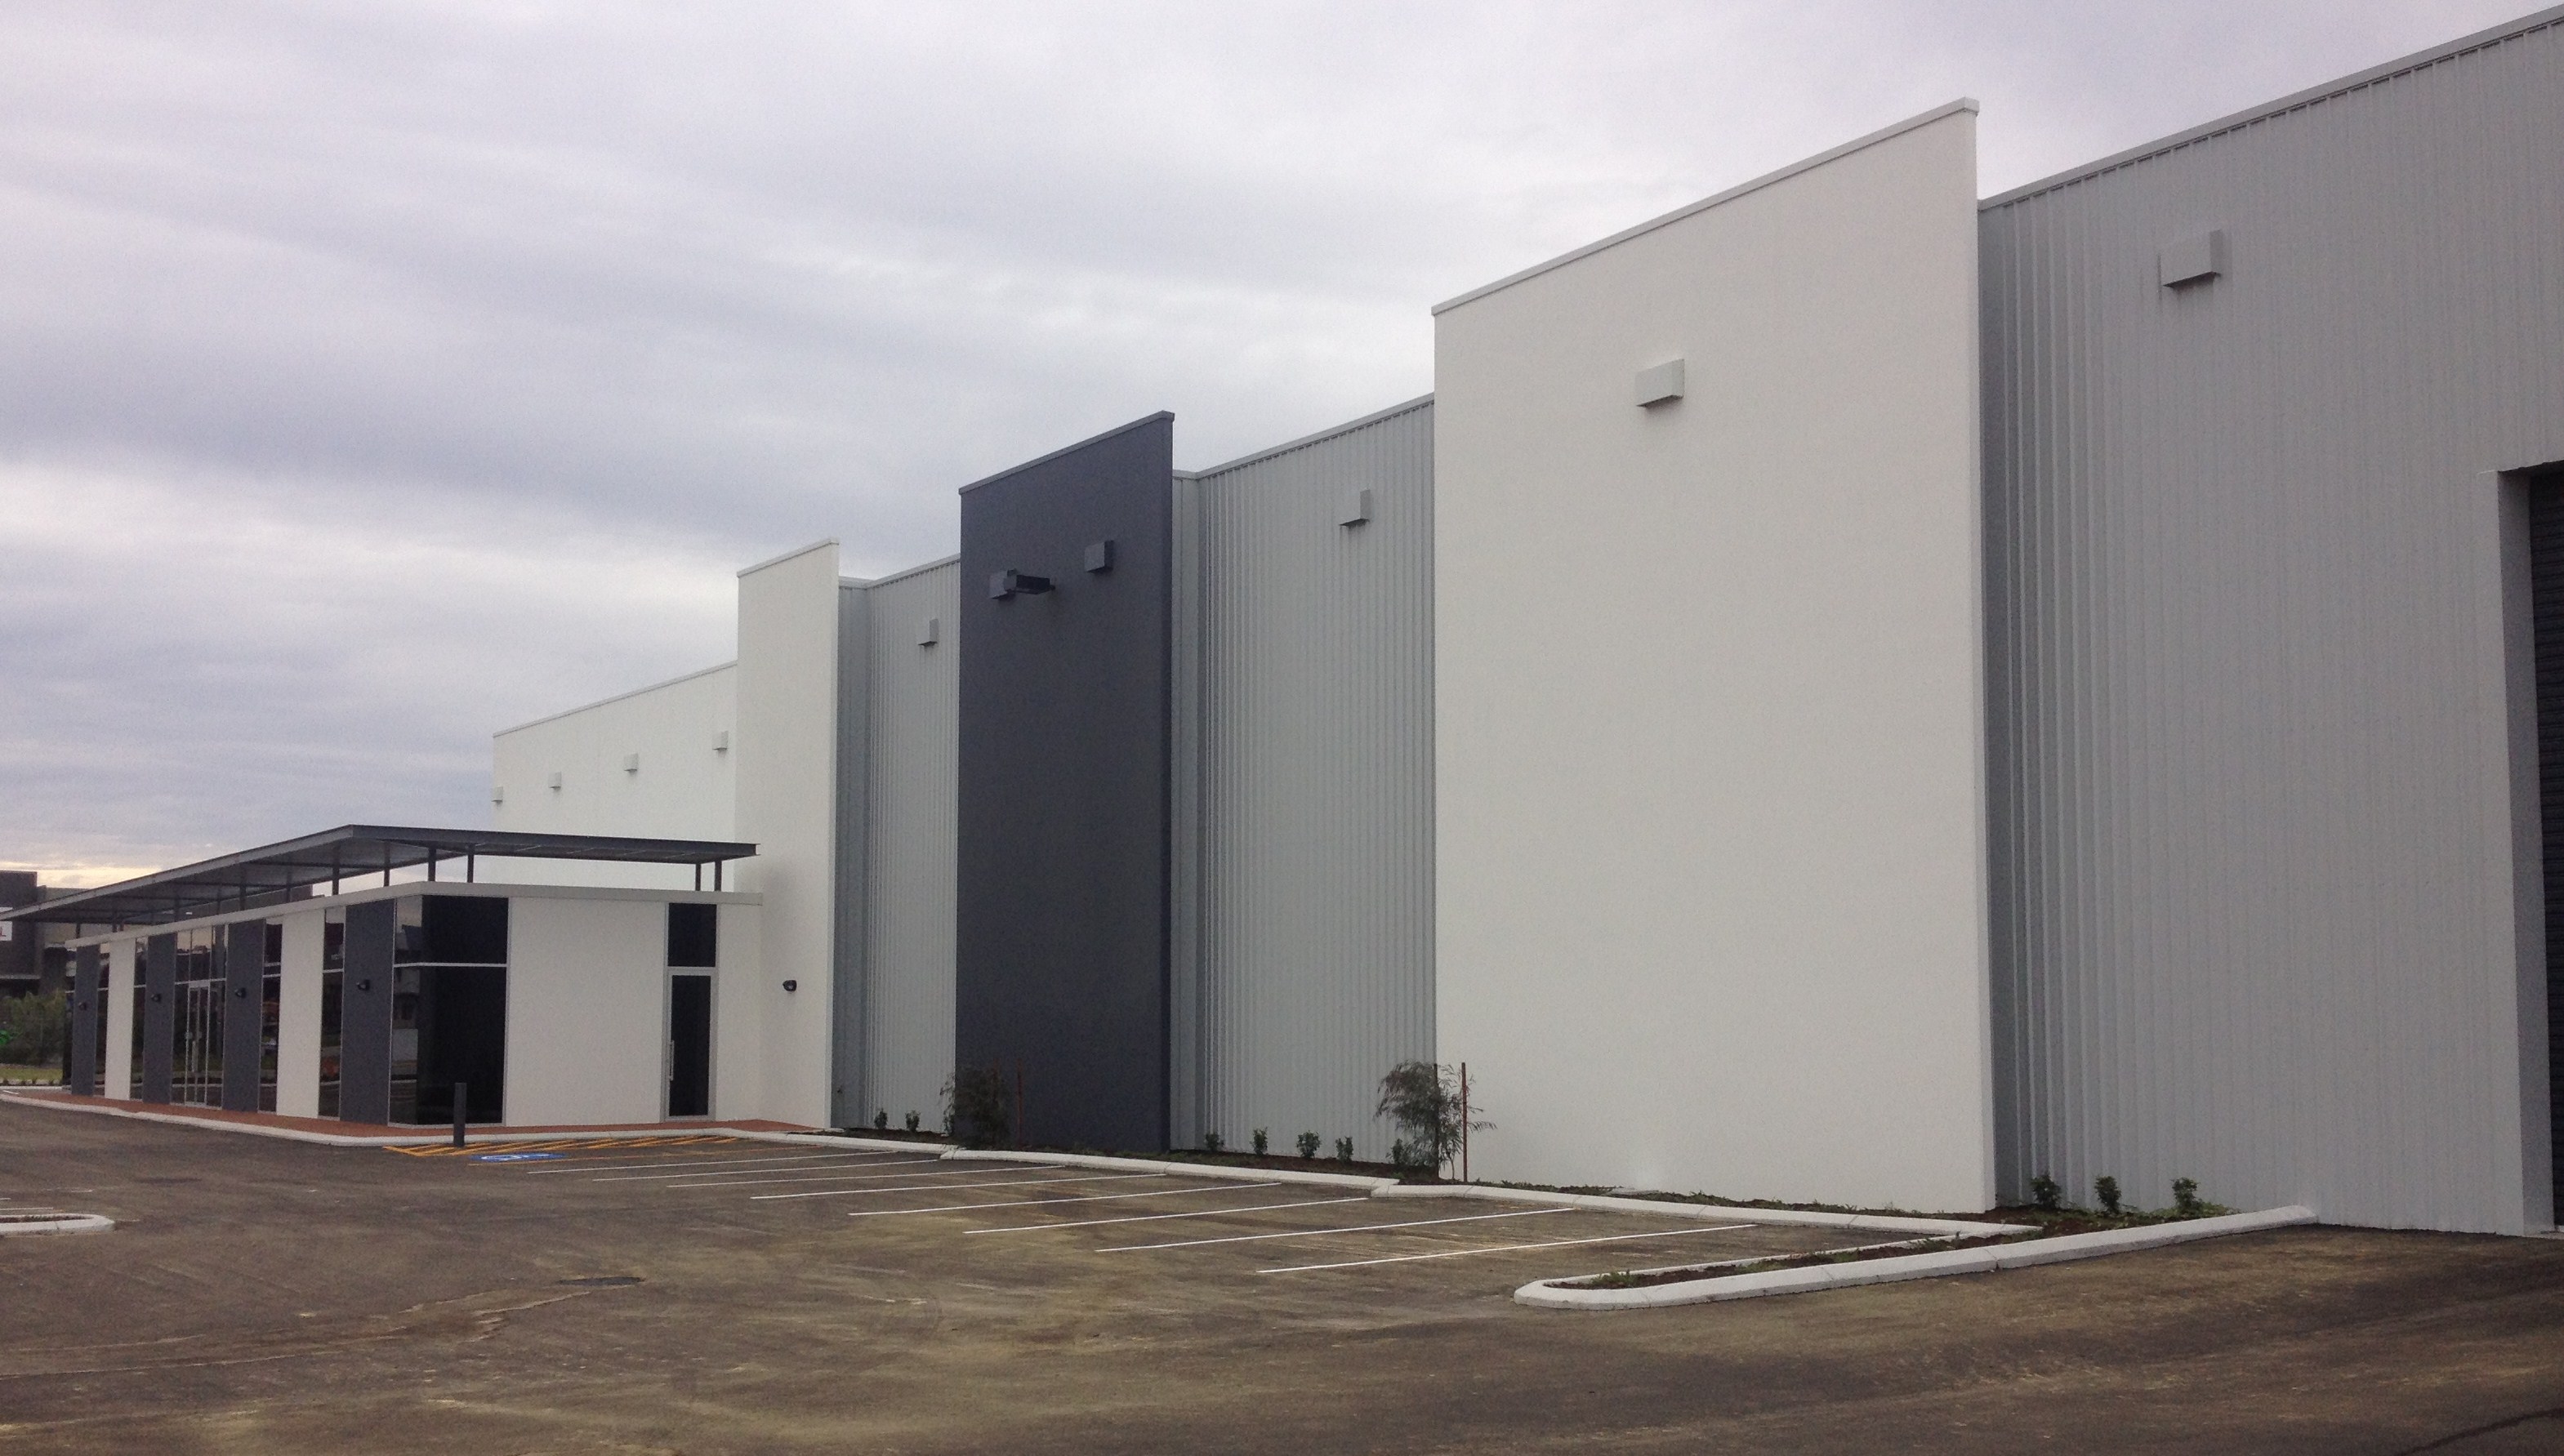 Exterior of large scale warehouse unit, painted in shades of grey